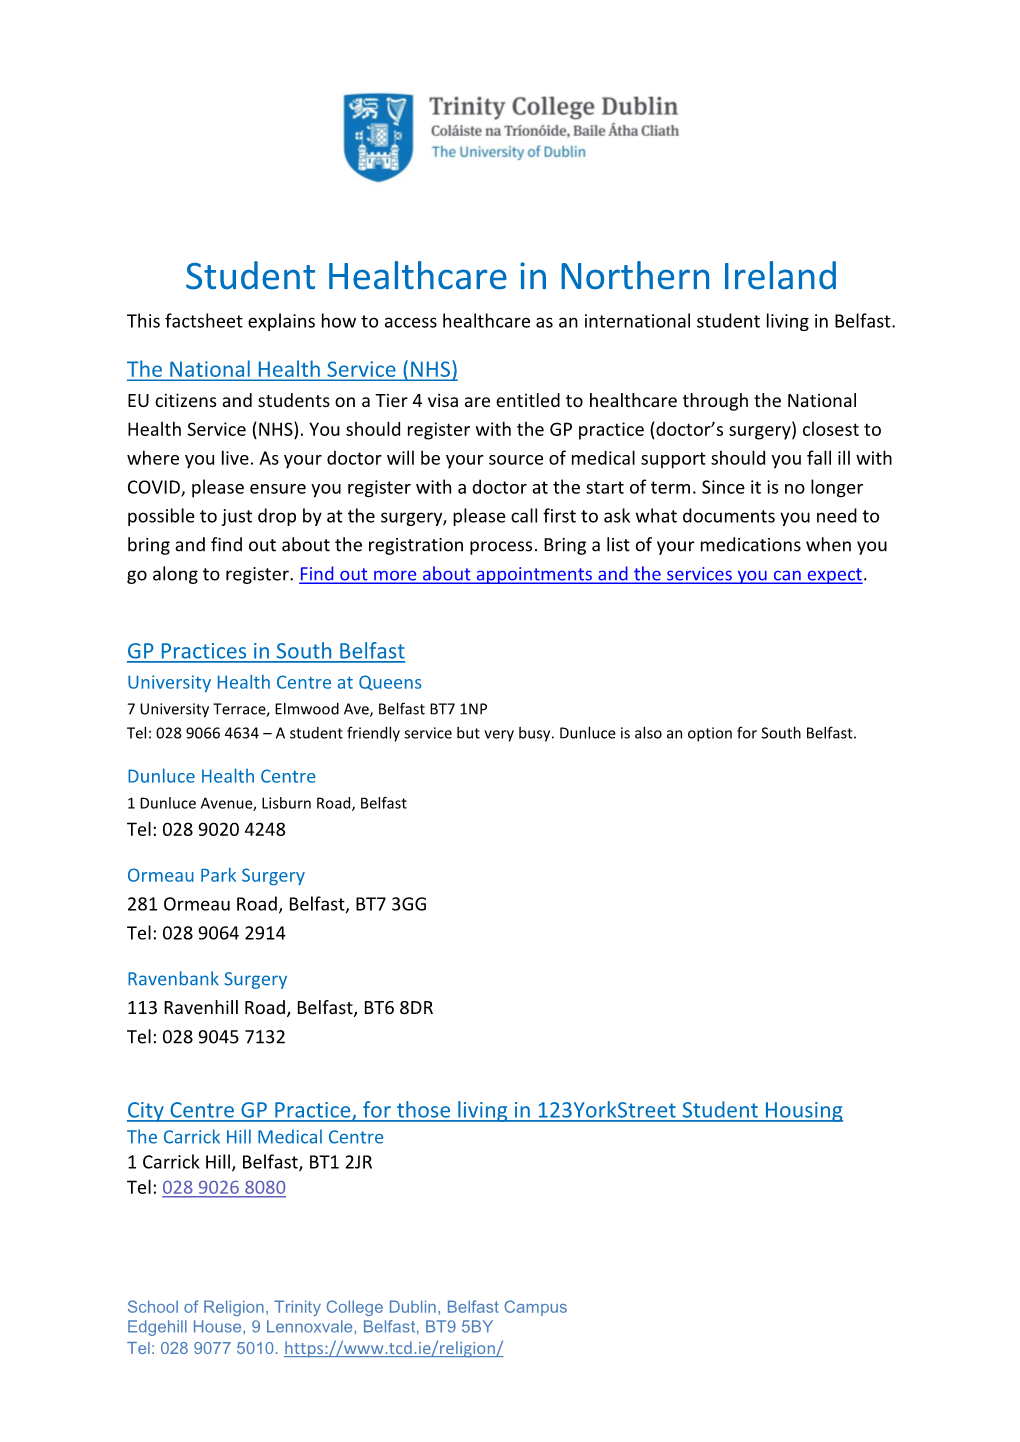 Student Healthcare in Northern Ireland This Factsheet Explains How to Access Healthcare As an International Student Living in Belfast